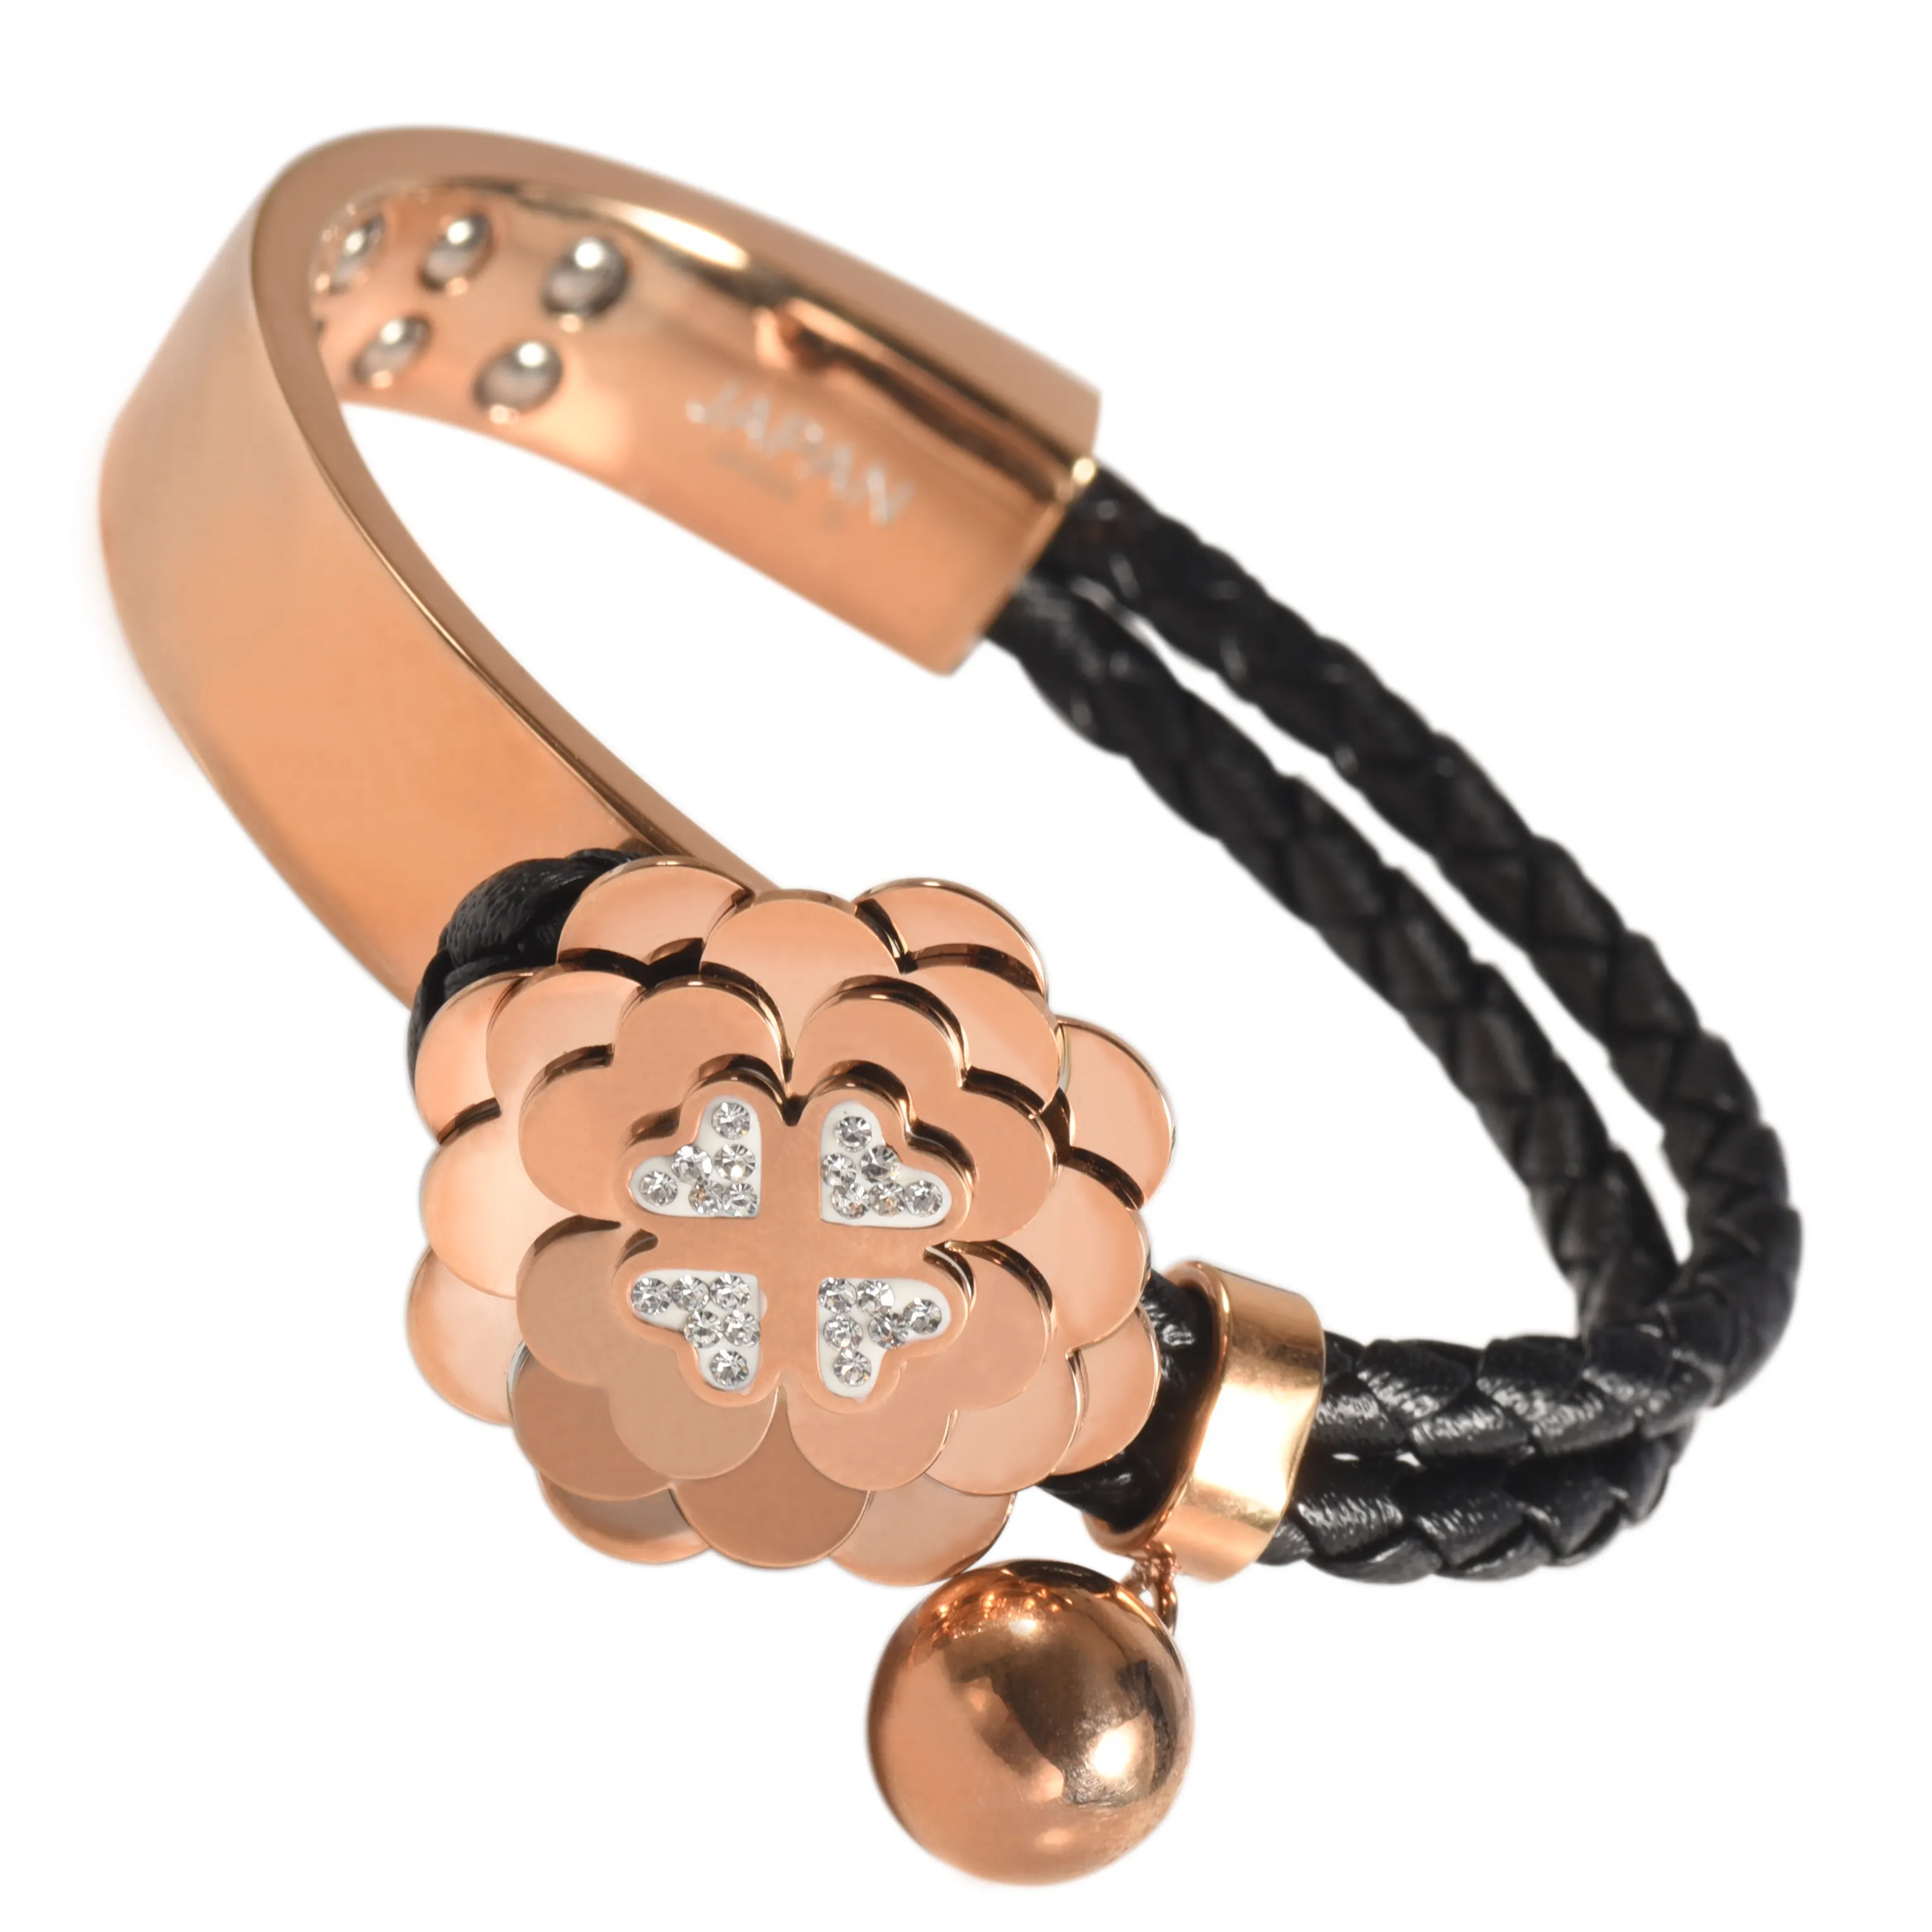 Wollet Rose Gold IPG Clovers Jewelry stainless steel leather women bangle